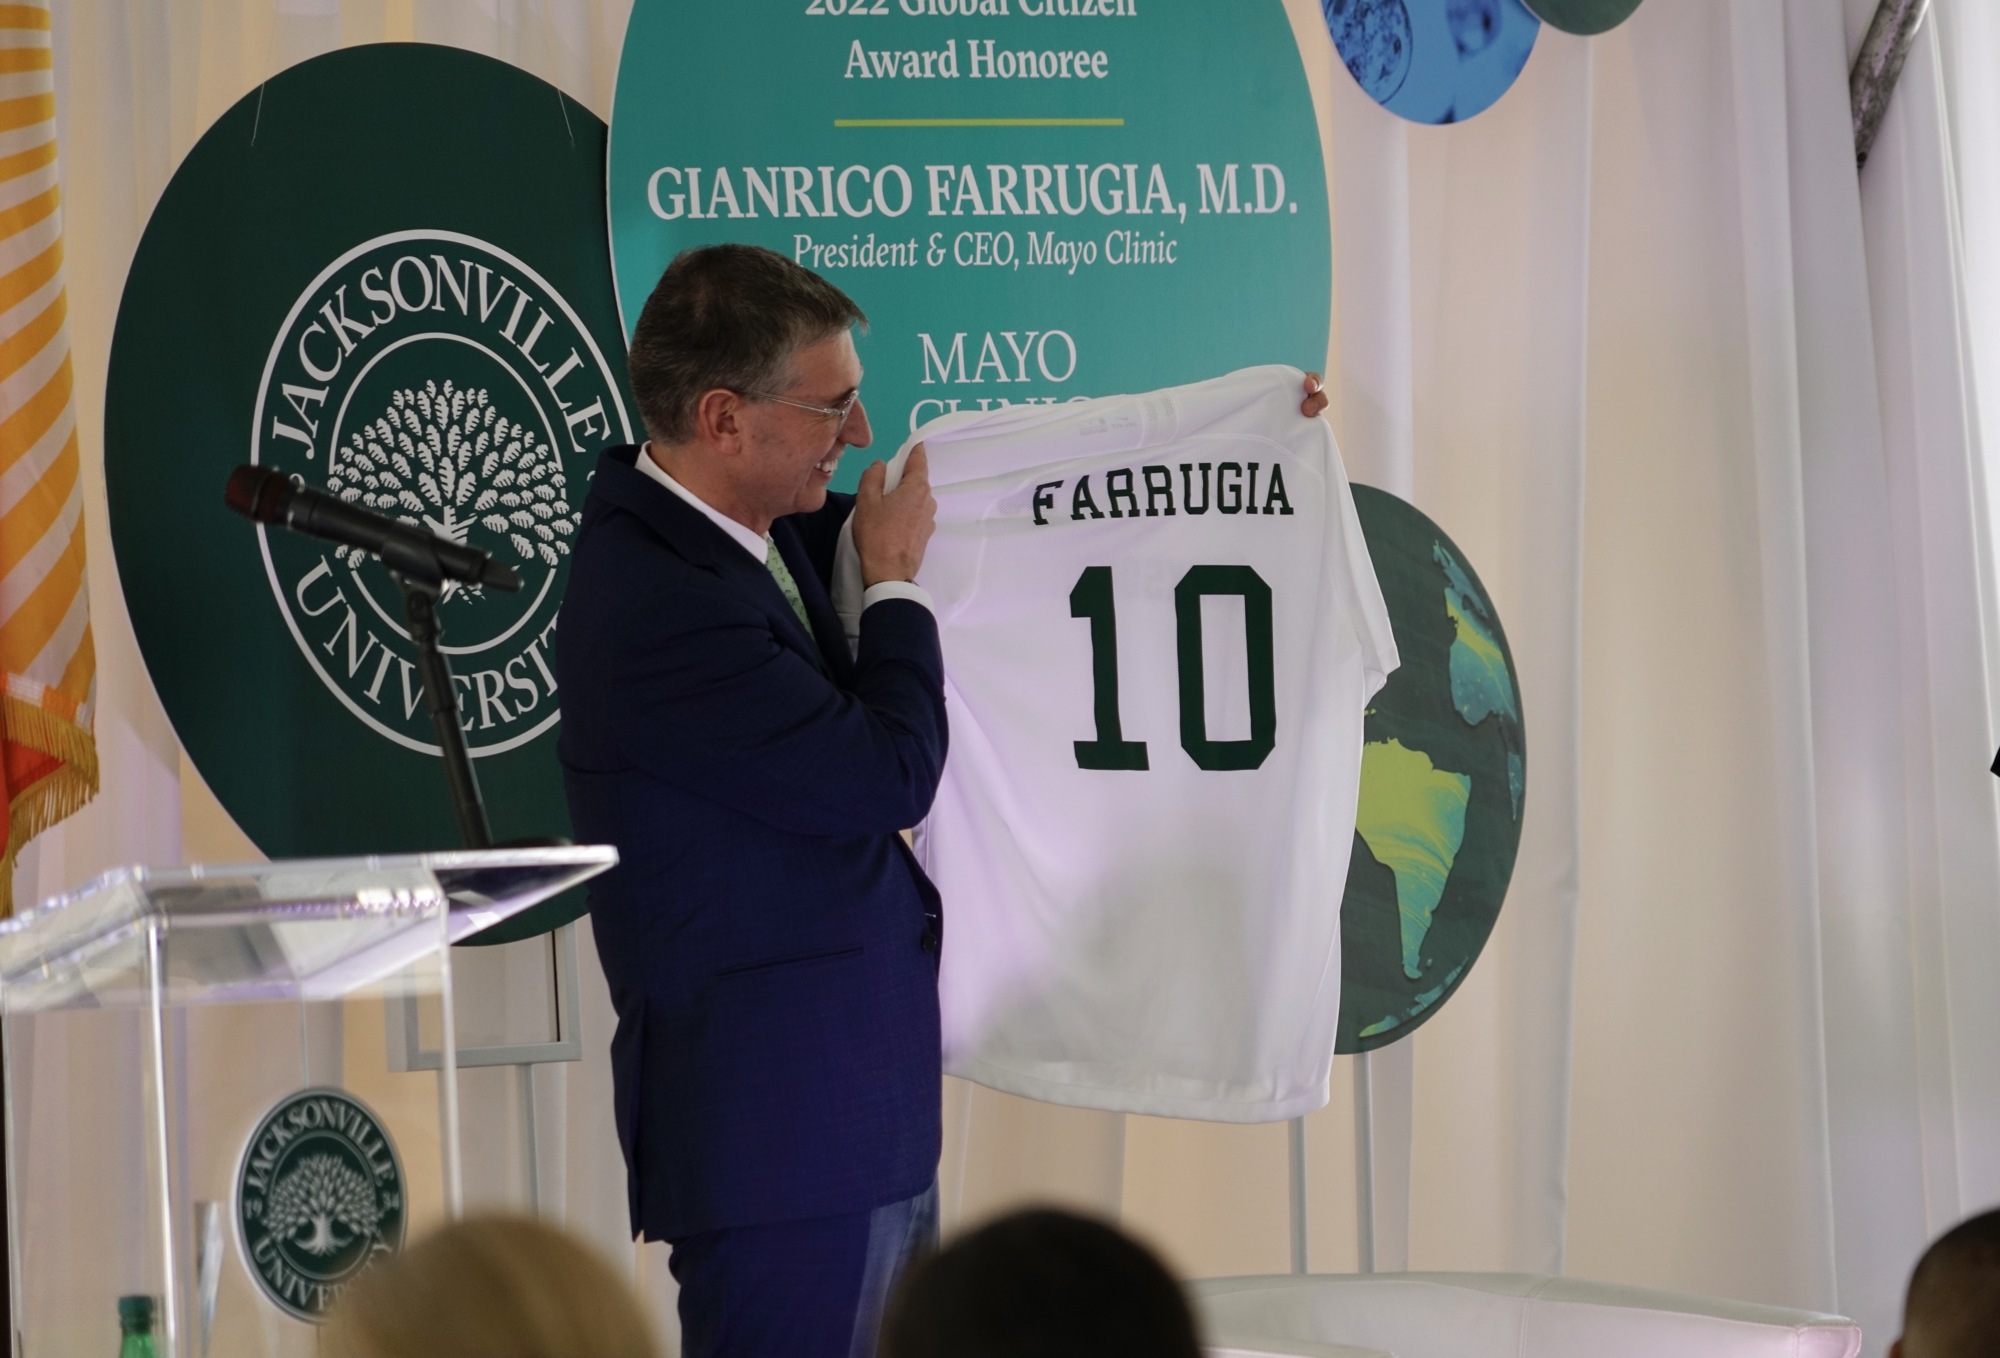 Mayo Clinic President and CEO Gianrico Farrugia also received a JU jersey.